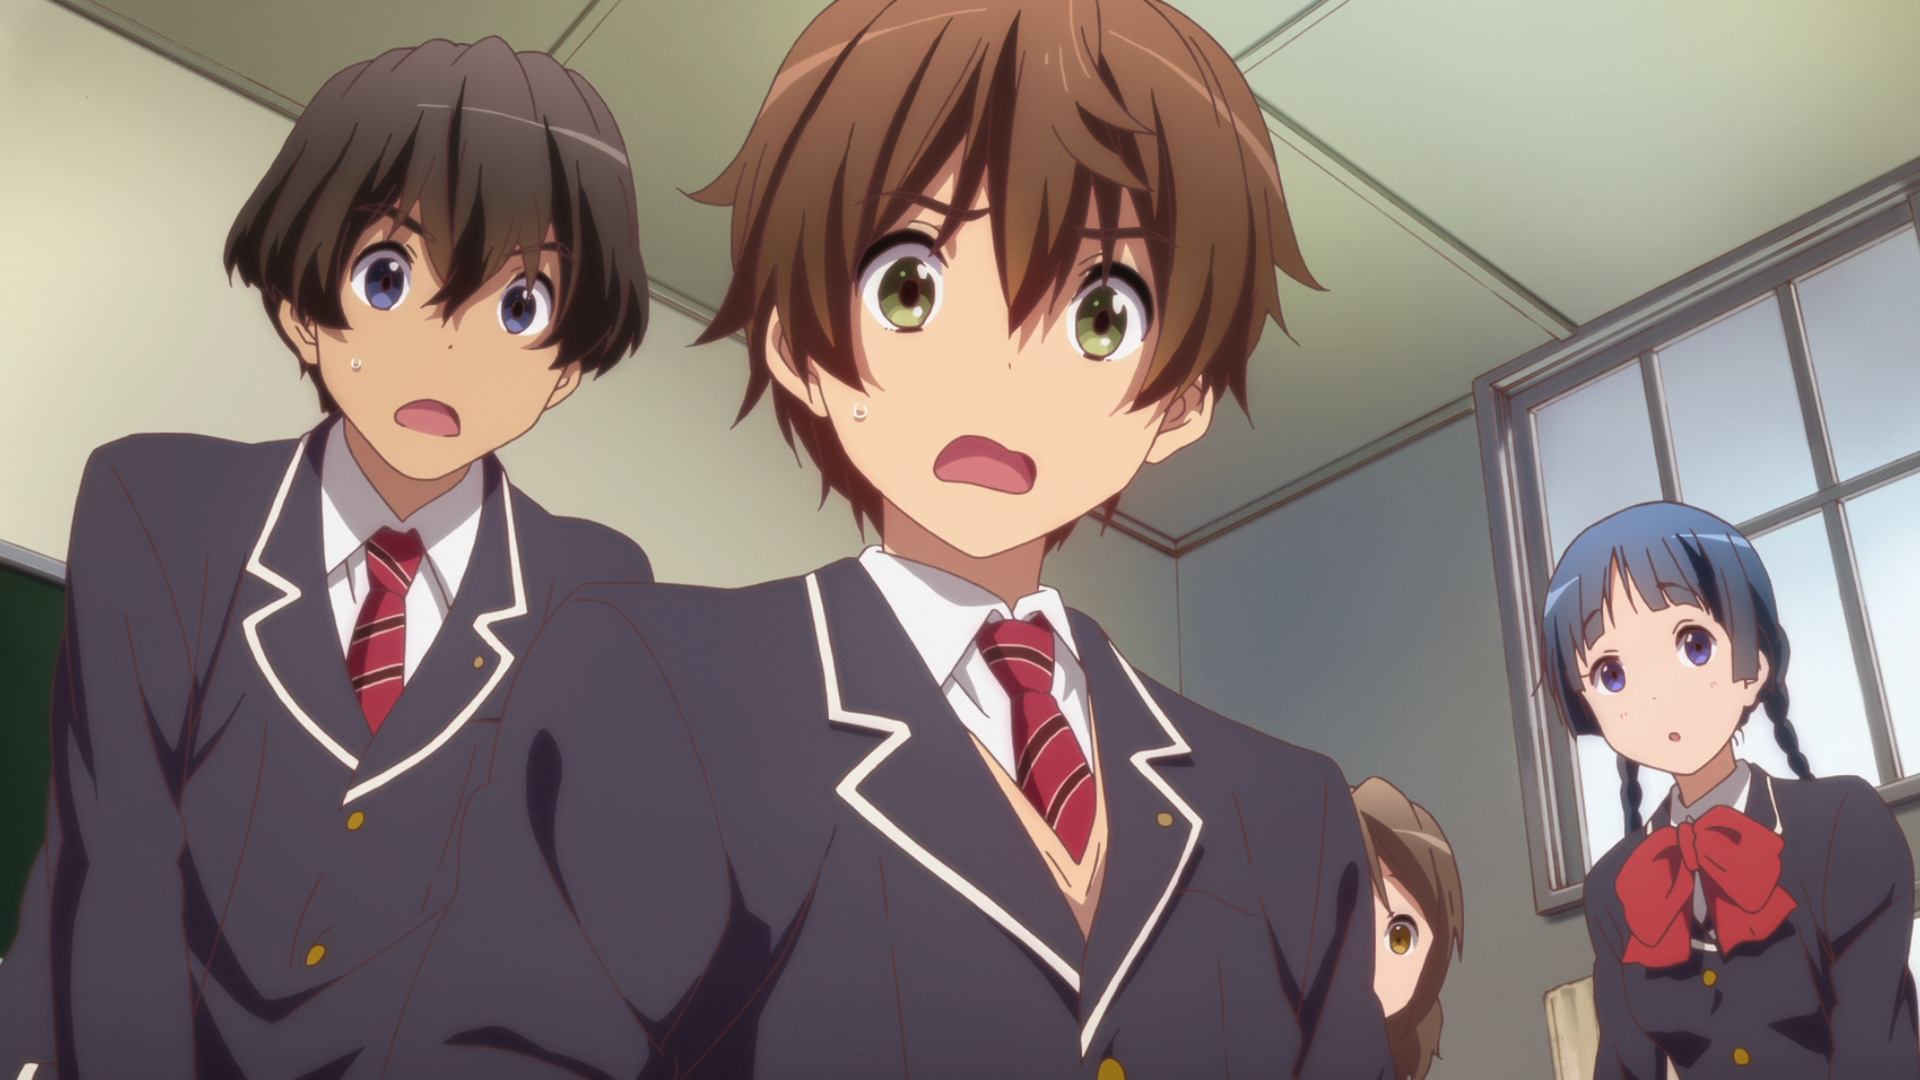 Personifying and relating to neurodiversity in Love, Chuunibyou